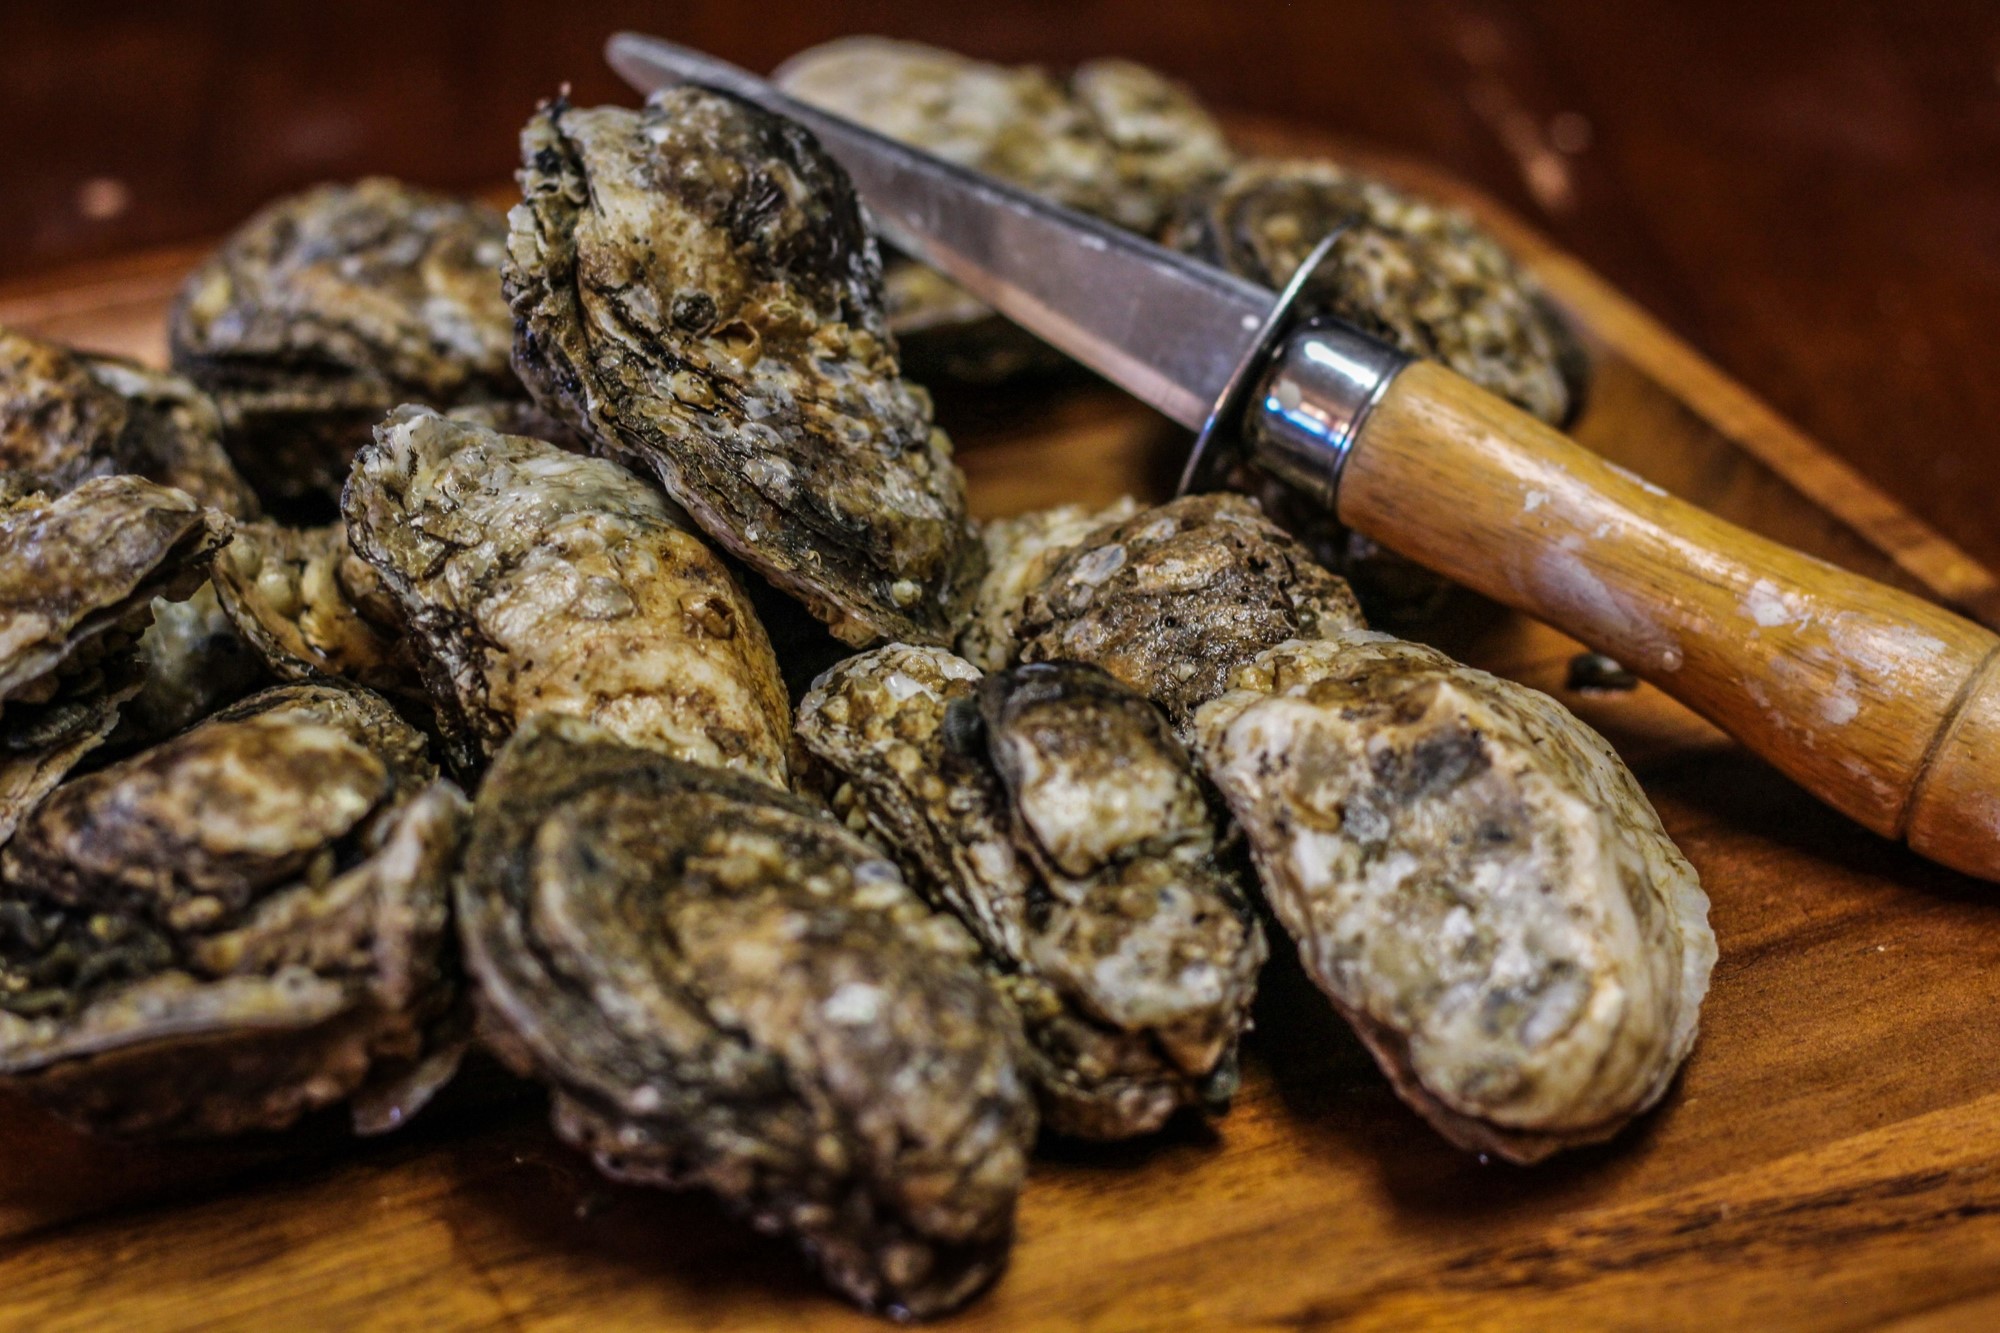 Shucking oysters to find pearls